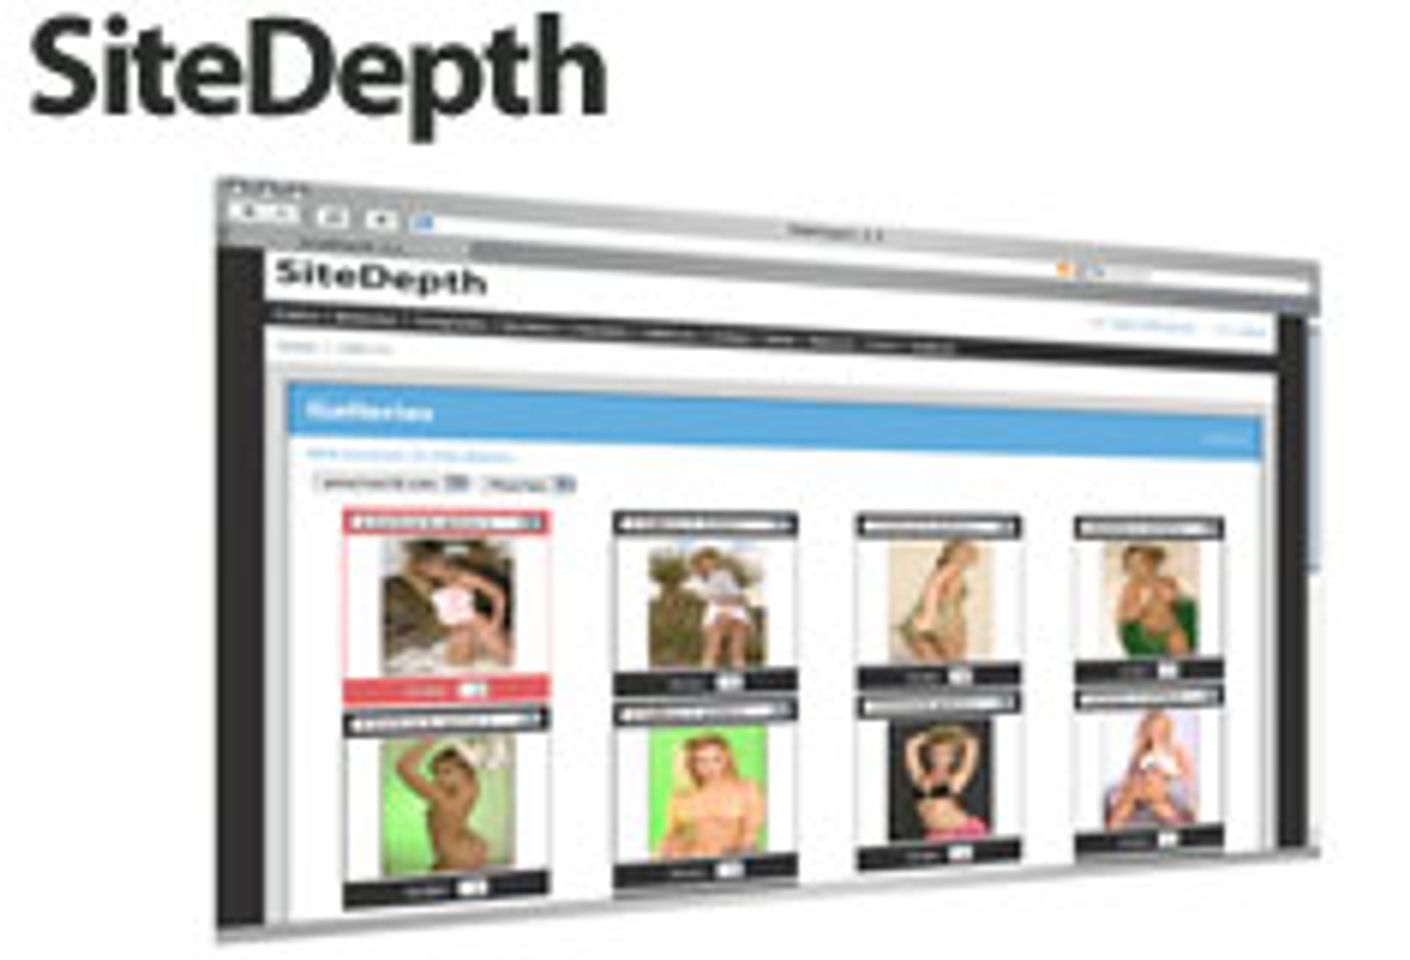 SiteDepth 2.0: Updated Content Management System